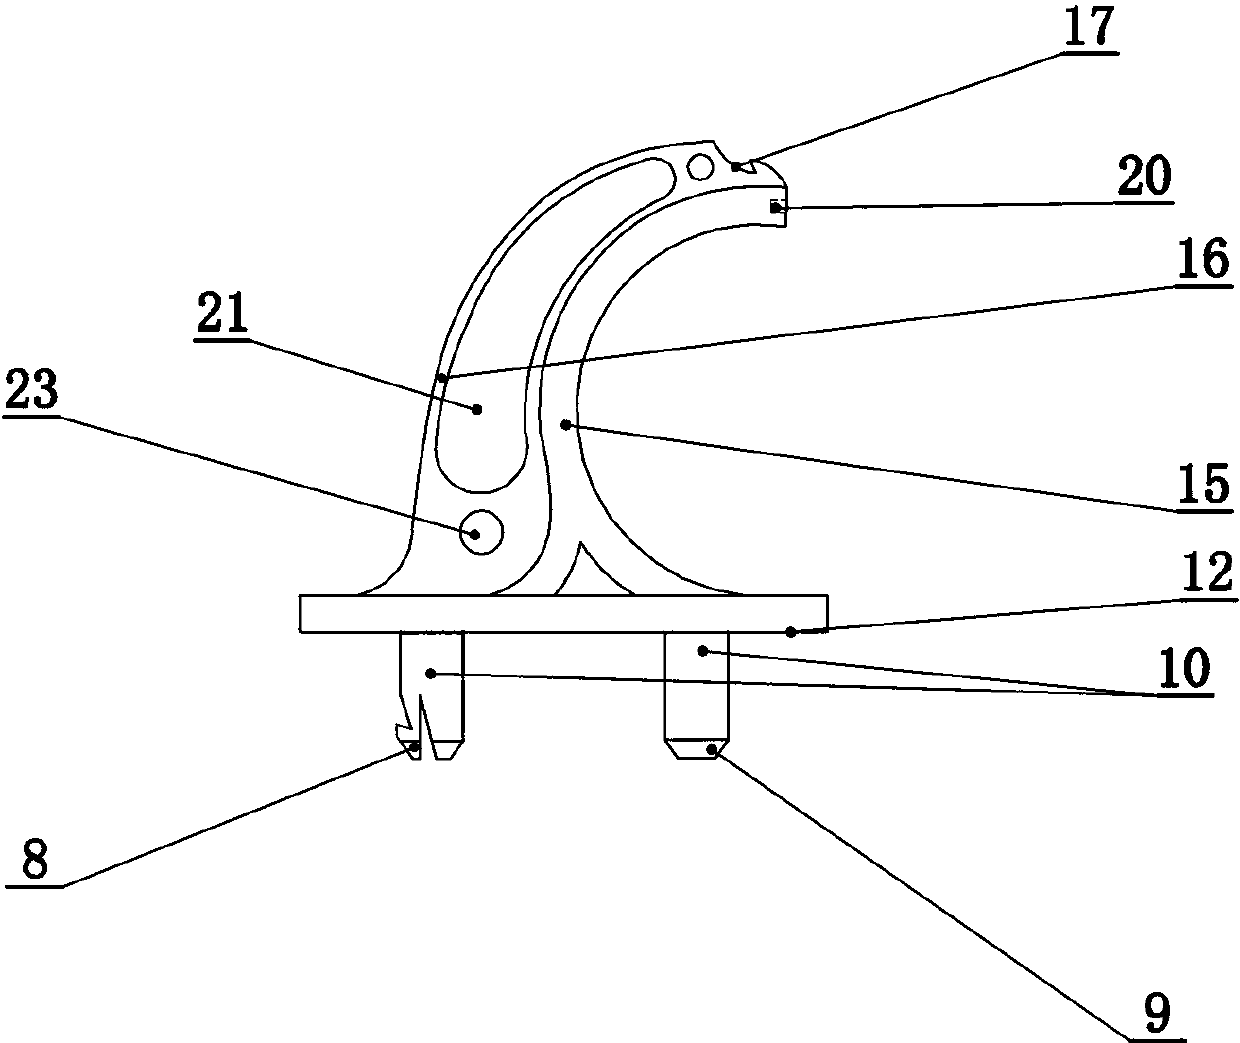 Combination cable shackle